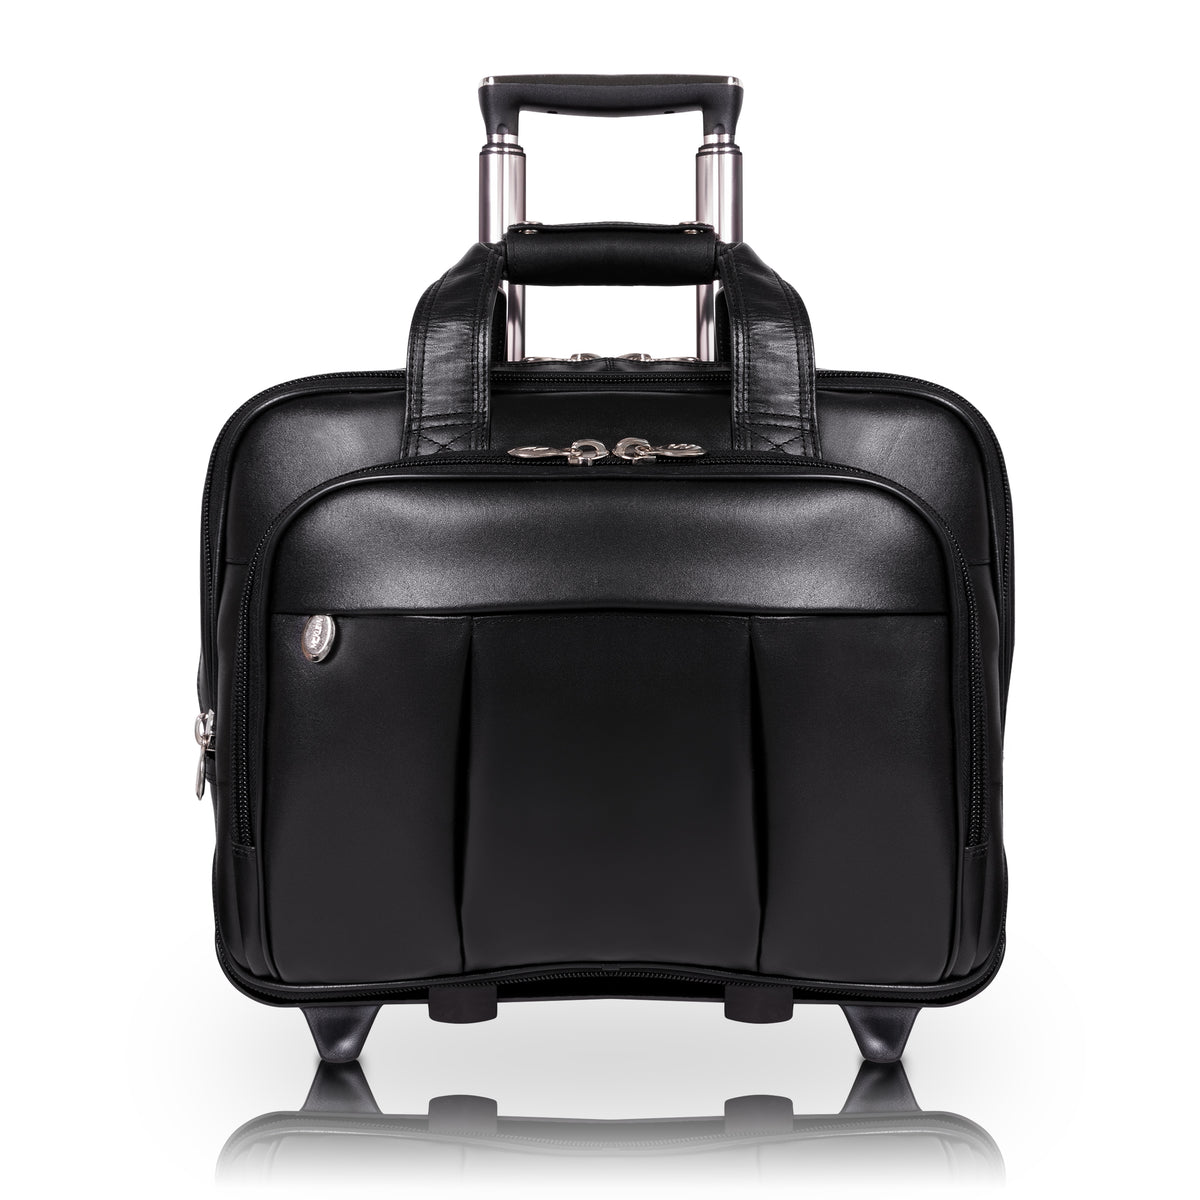  Laptop Briefcases - Rolling & Wheeled / Laptop